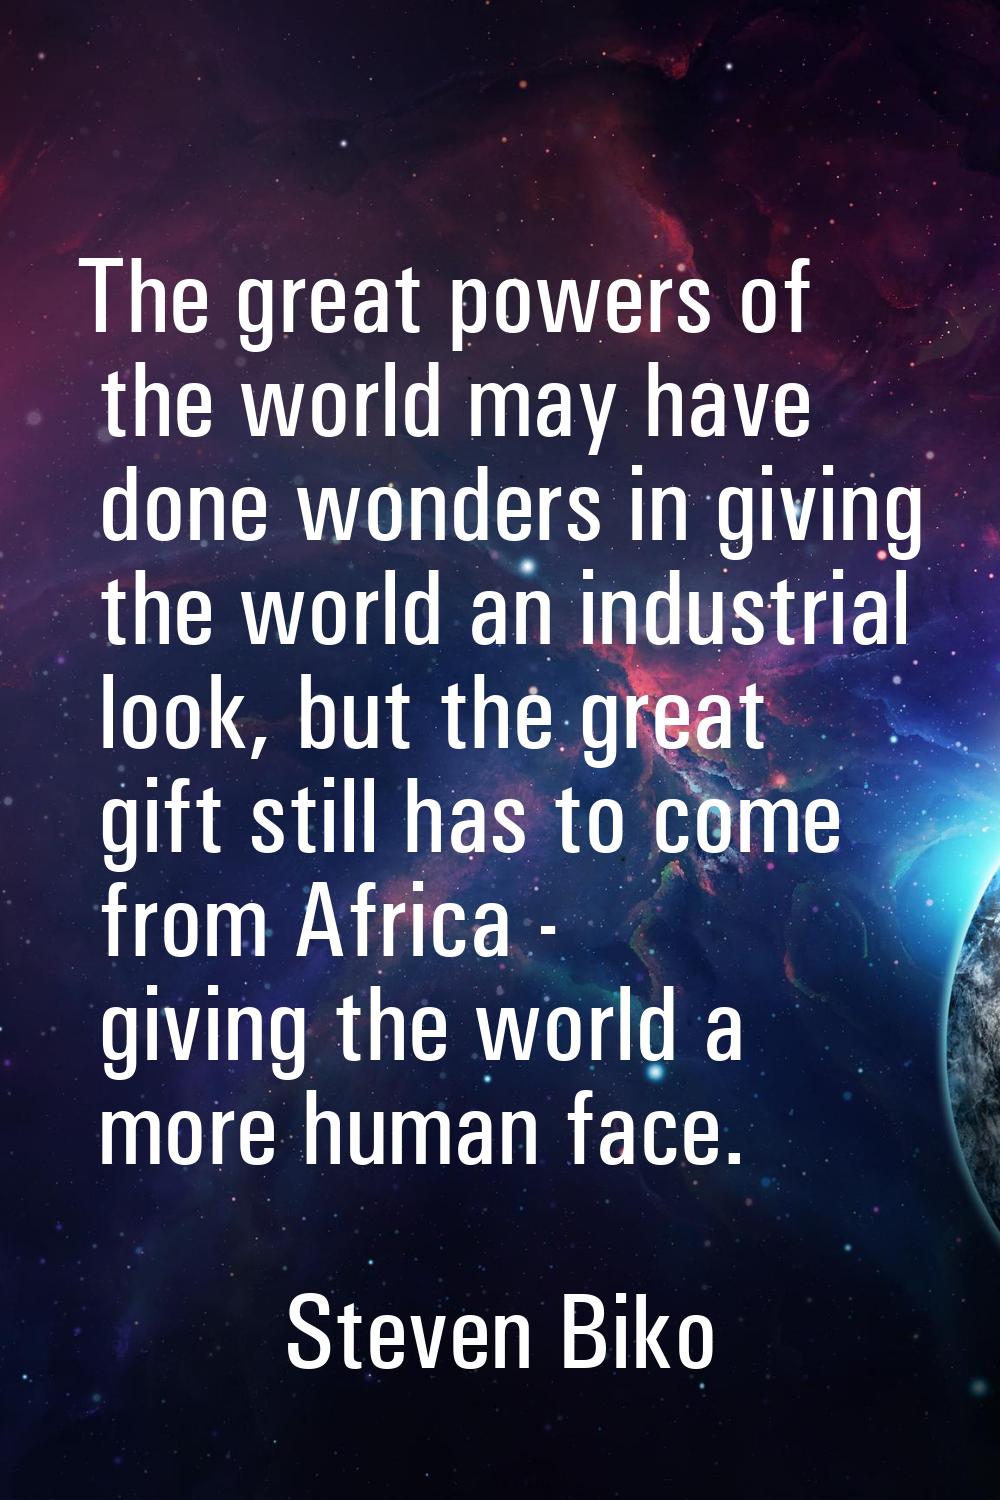 The great powers of the world may have done wonders in giving the world an industrial look, but the